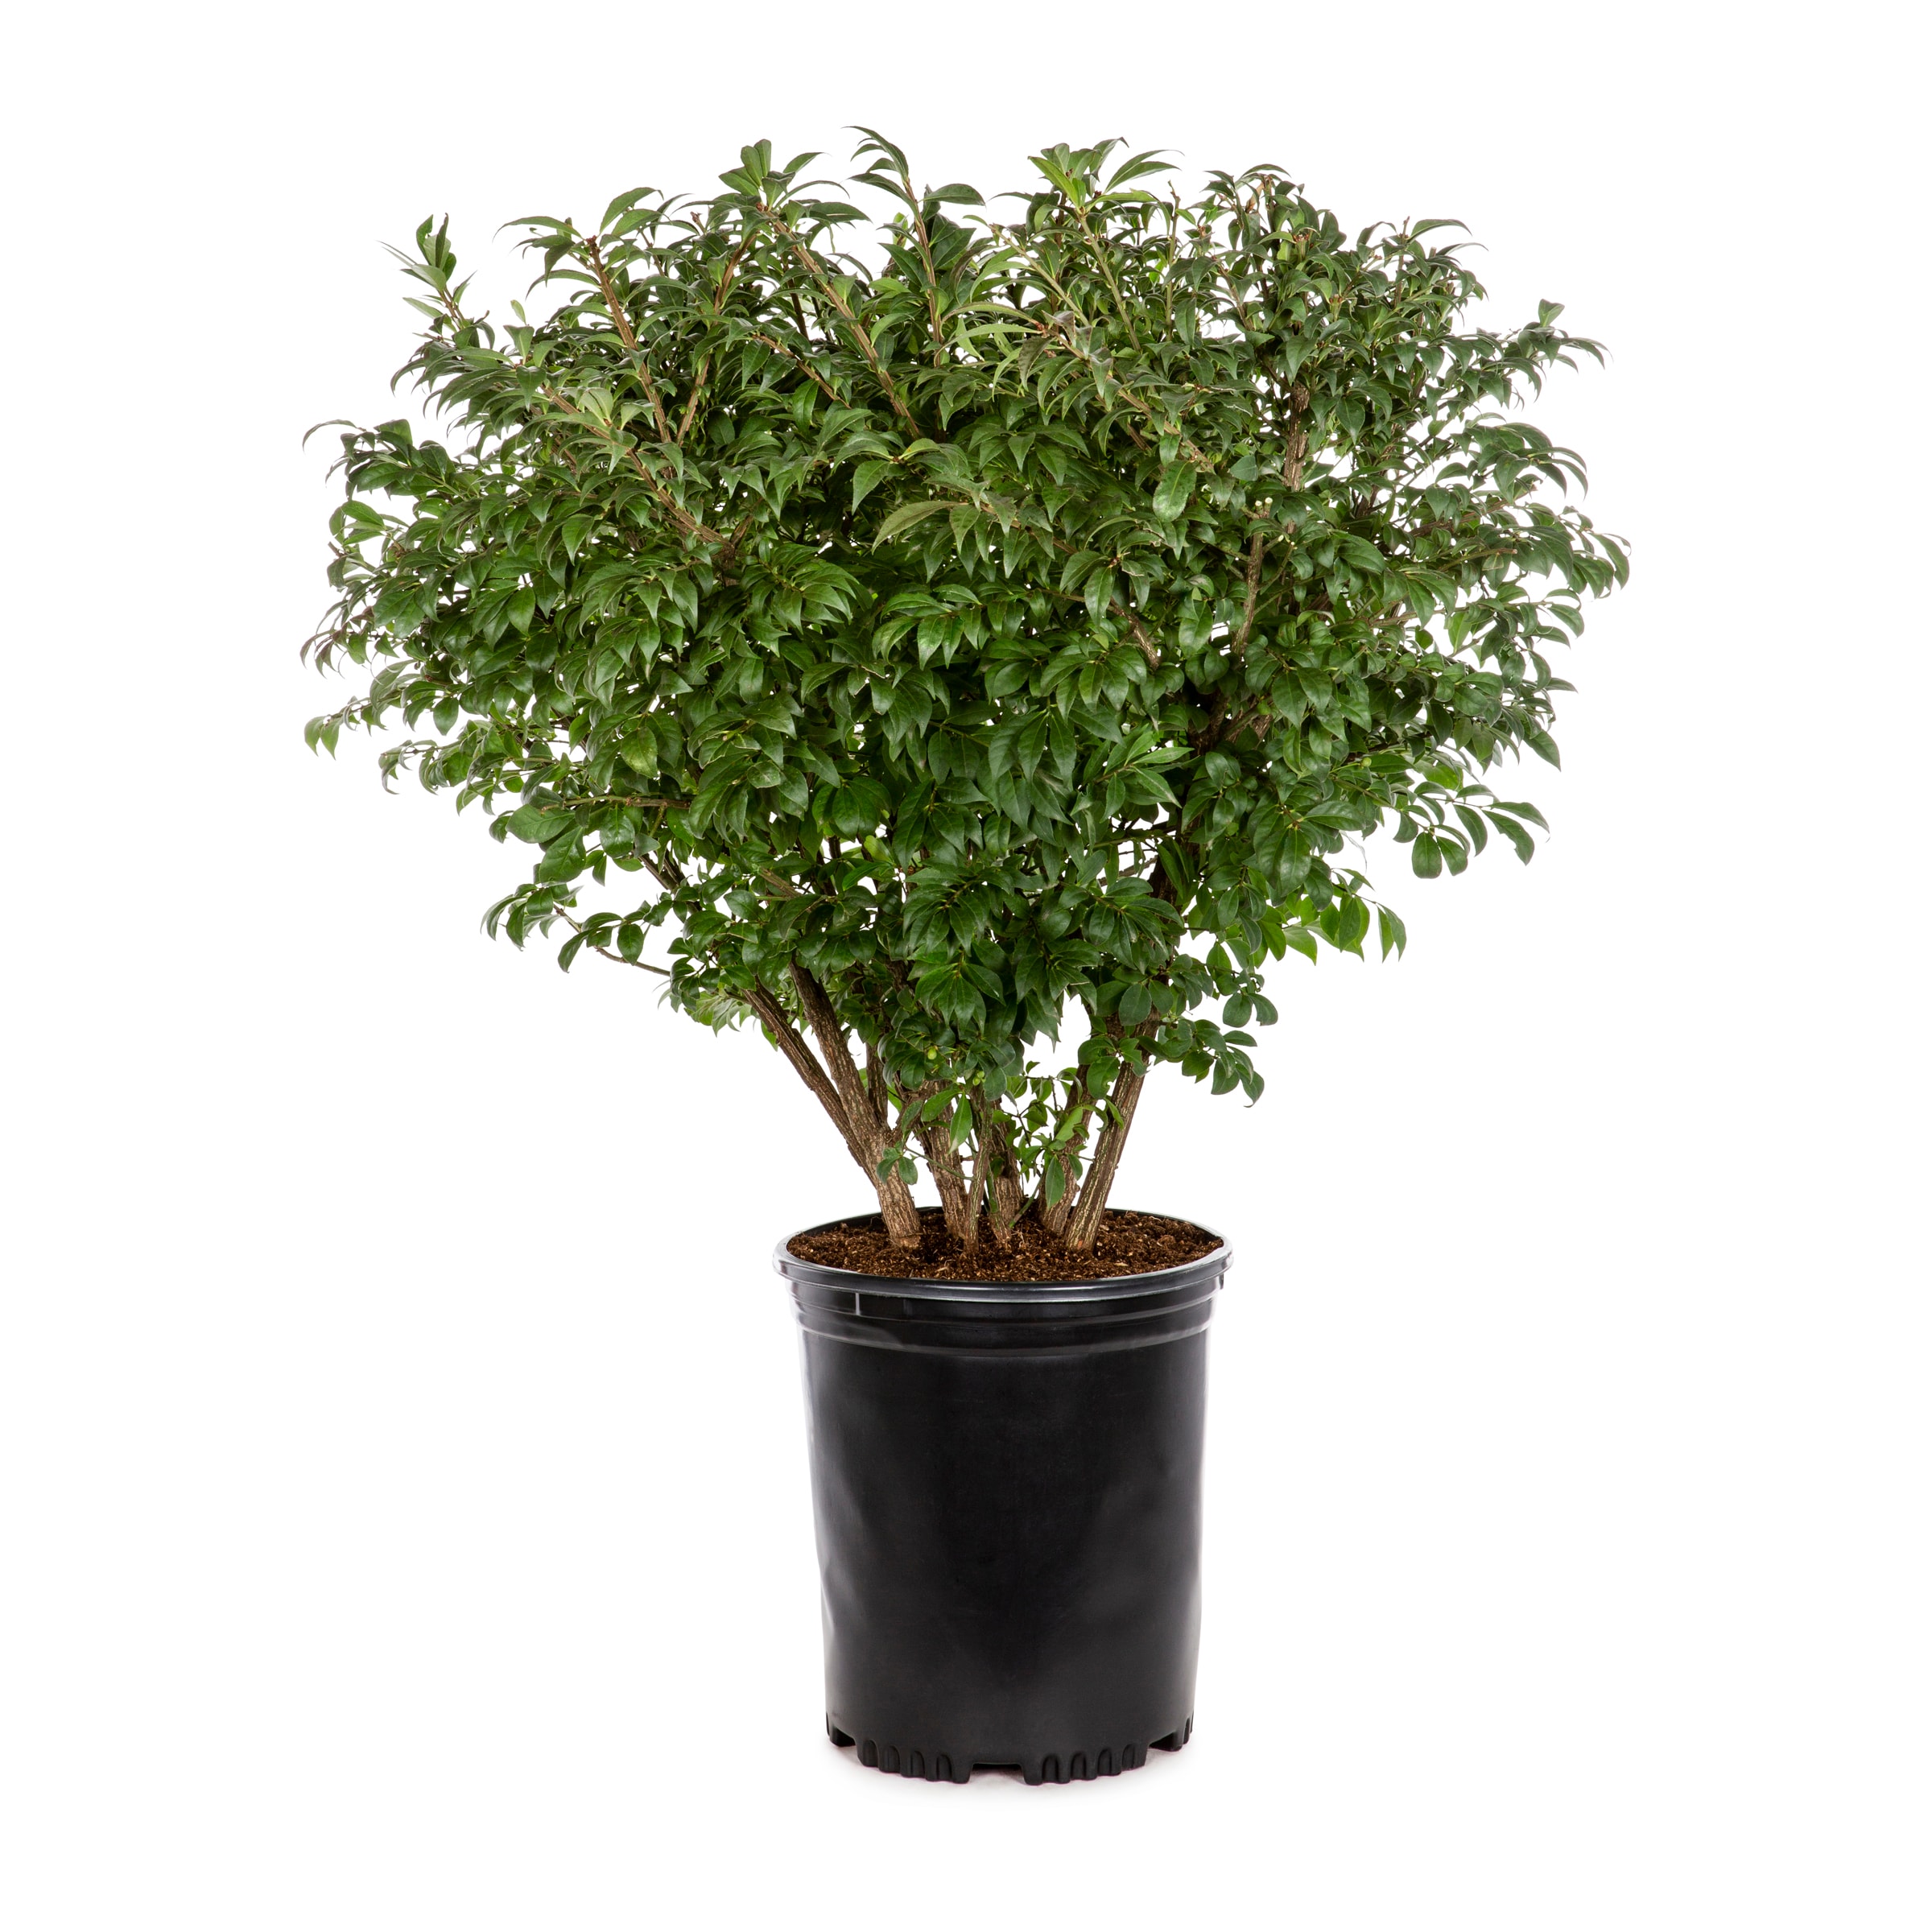 Image of Euonymus burning bush in a pot